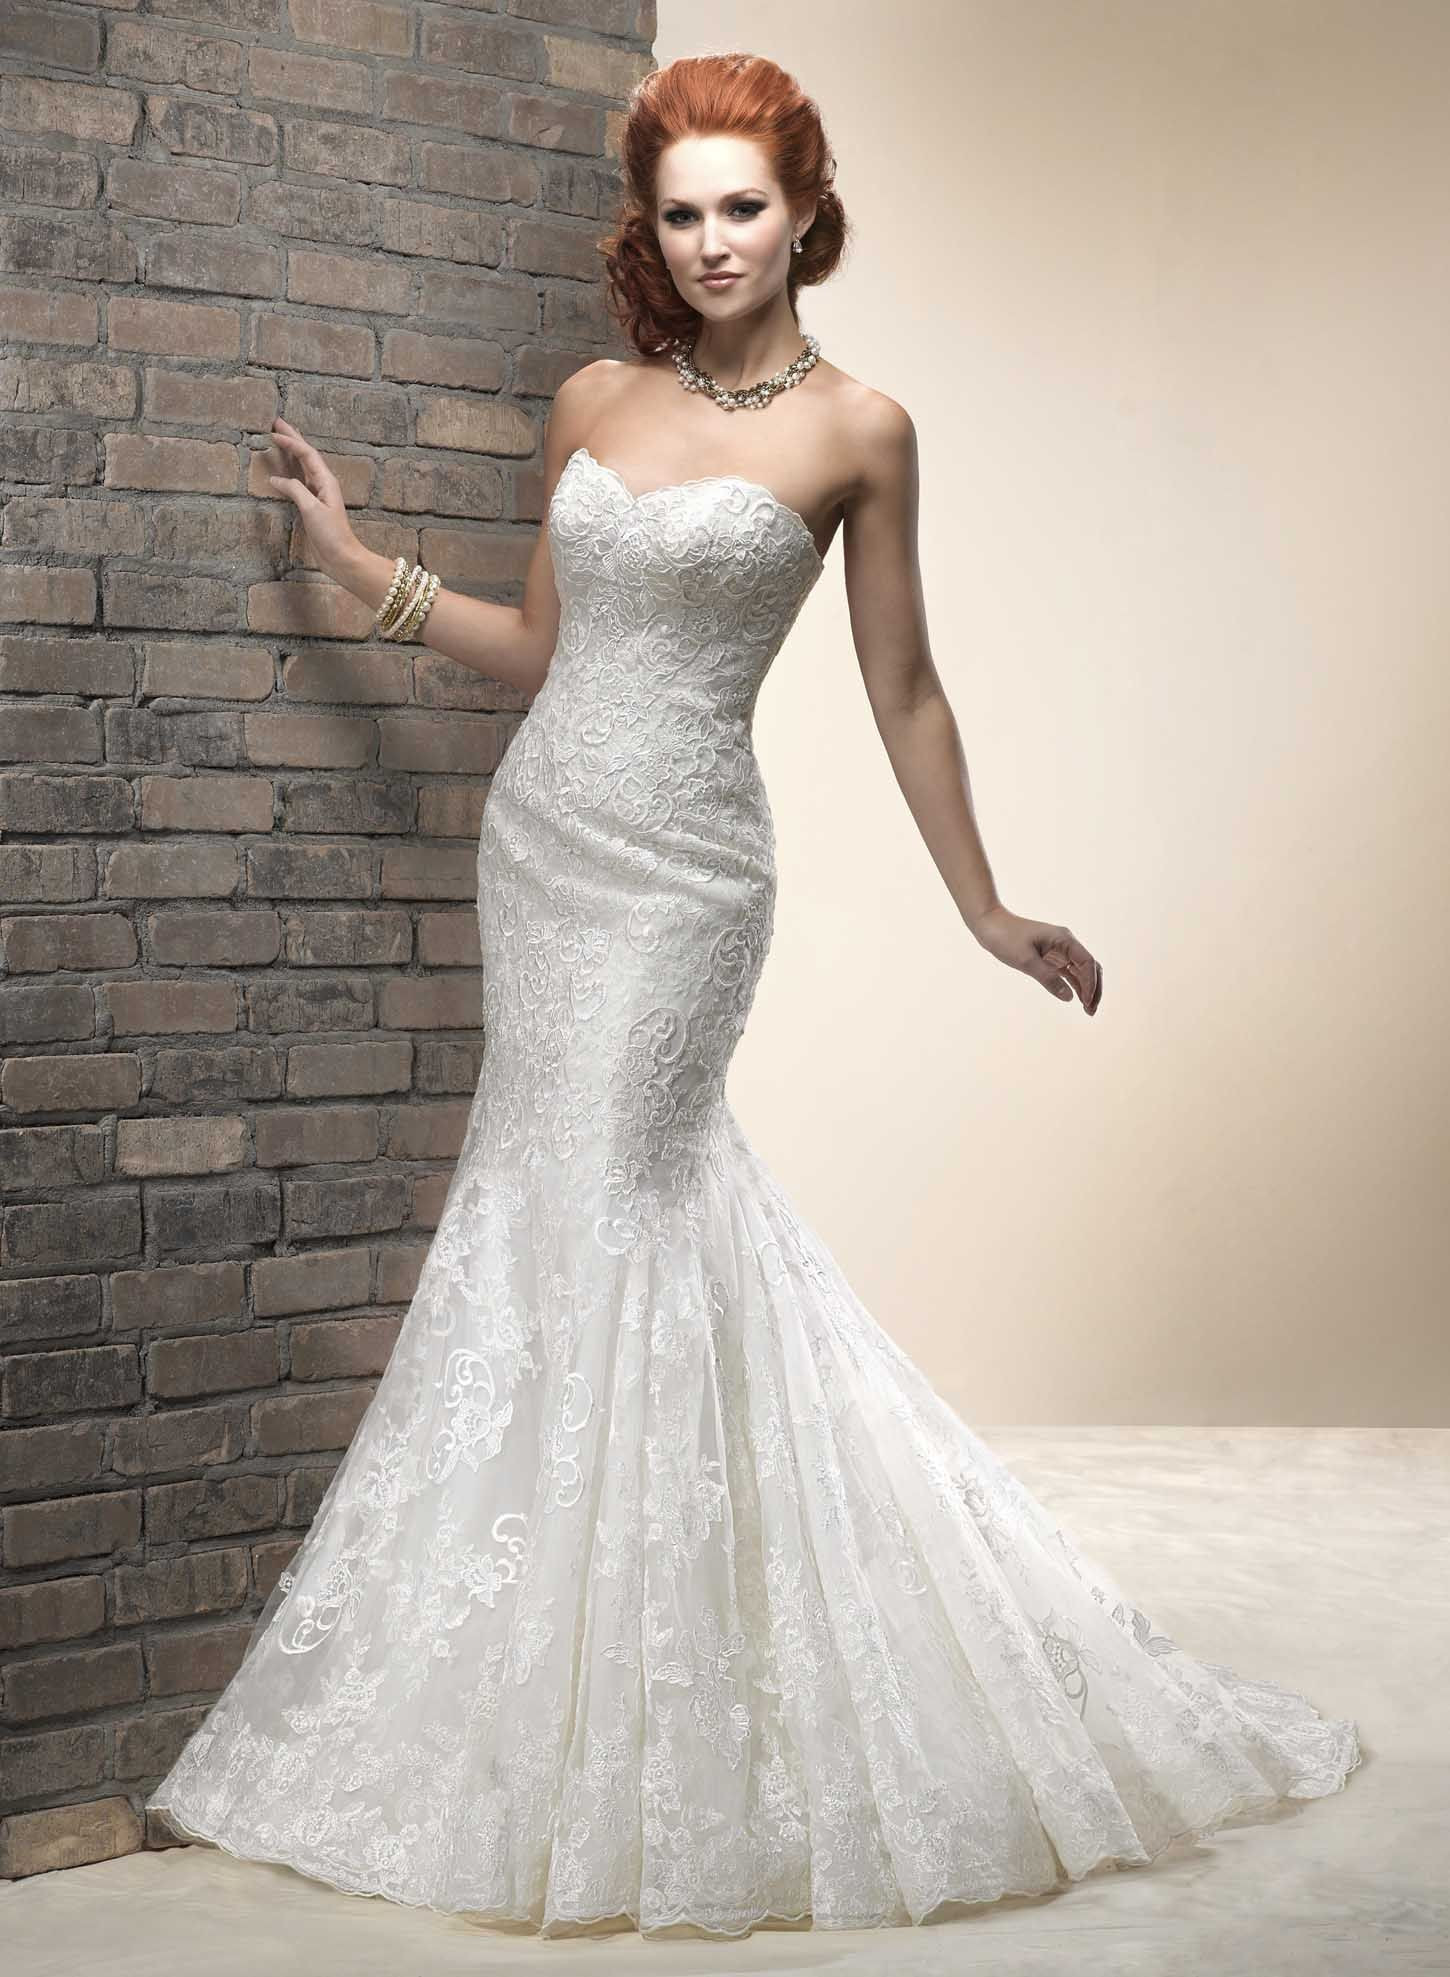 Lace Mermaid Wedding Dresses
 Show Your Beauty in Lace Wedding Dresses on Wedding